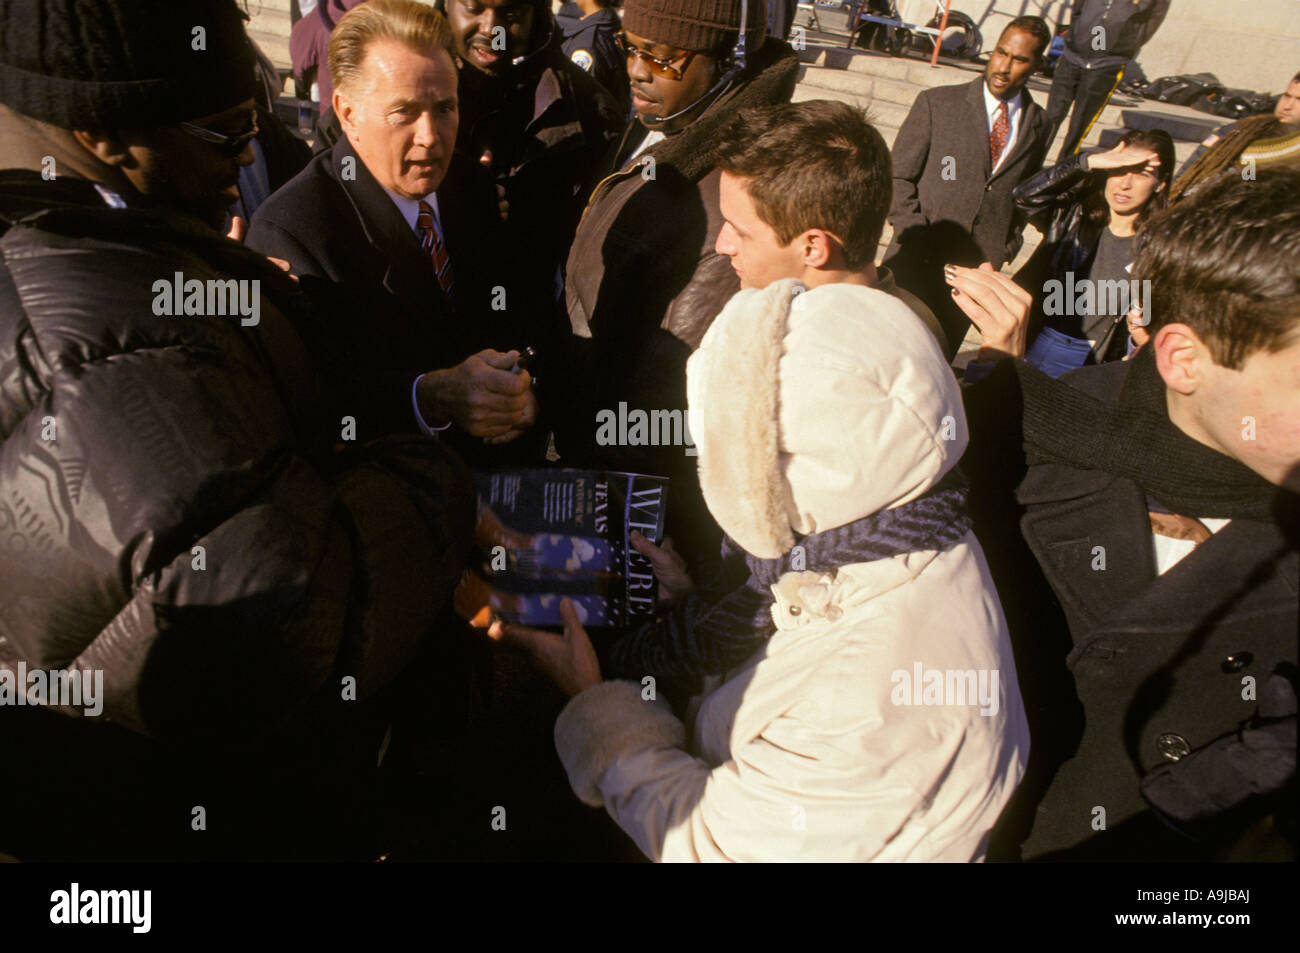 TV movie actor Martin Sheen West Wing President on location fans Washington DC Stock Photo